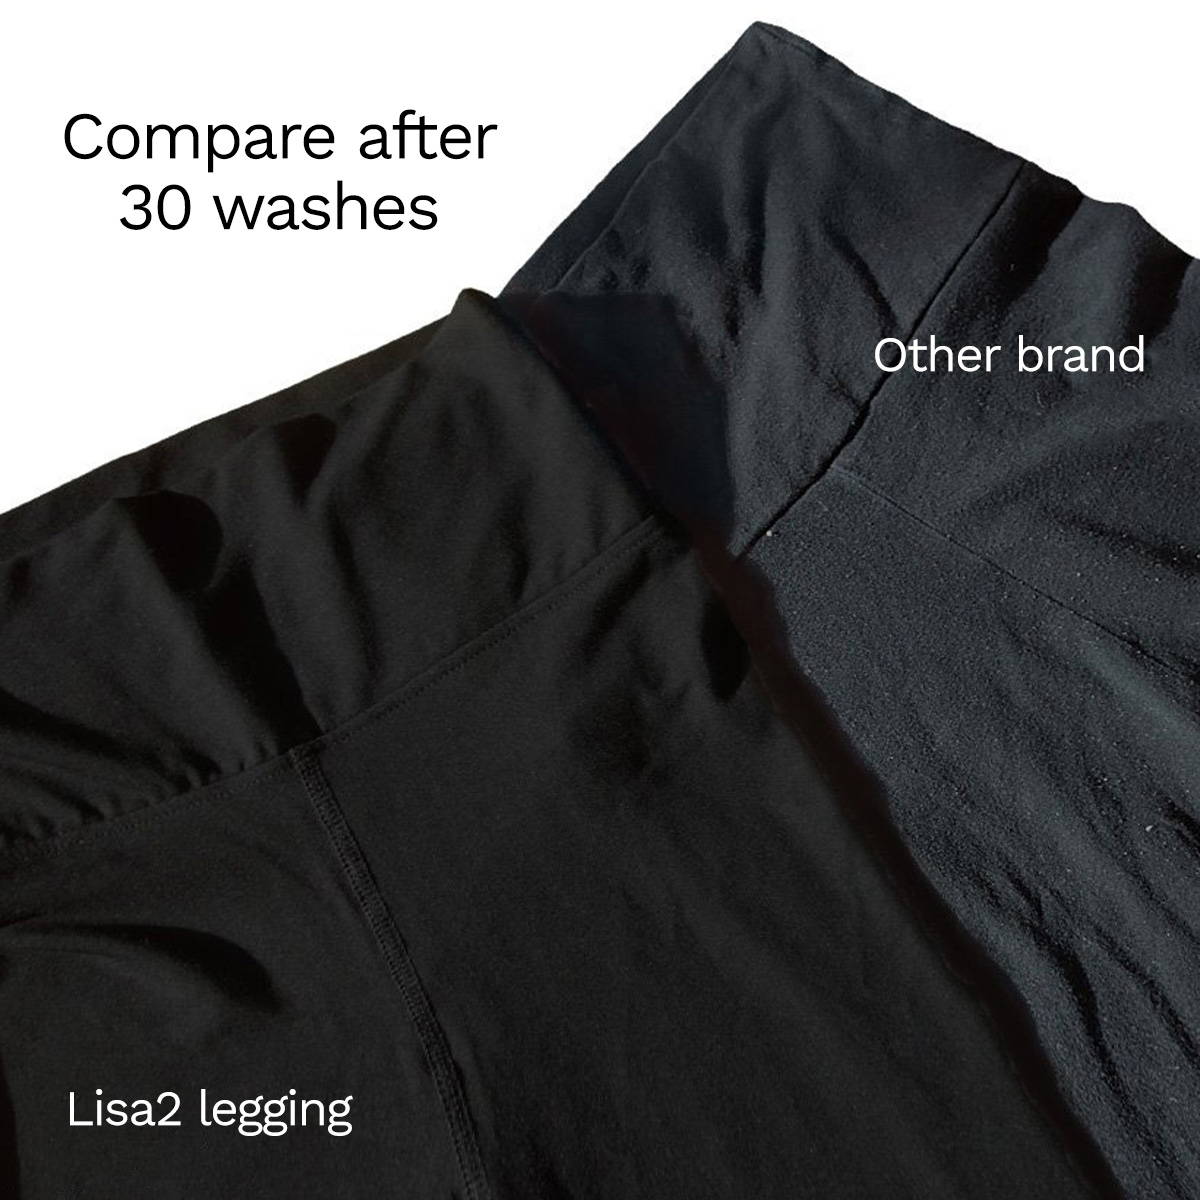 A comparison image between Miik and another brand after 30 washes to show Miik's quality.